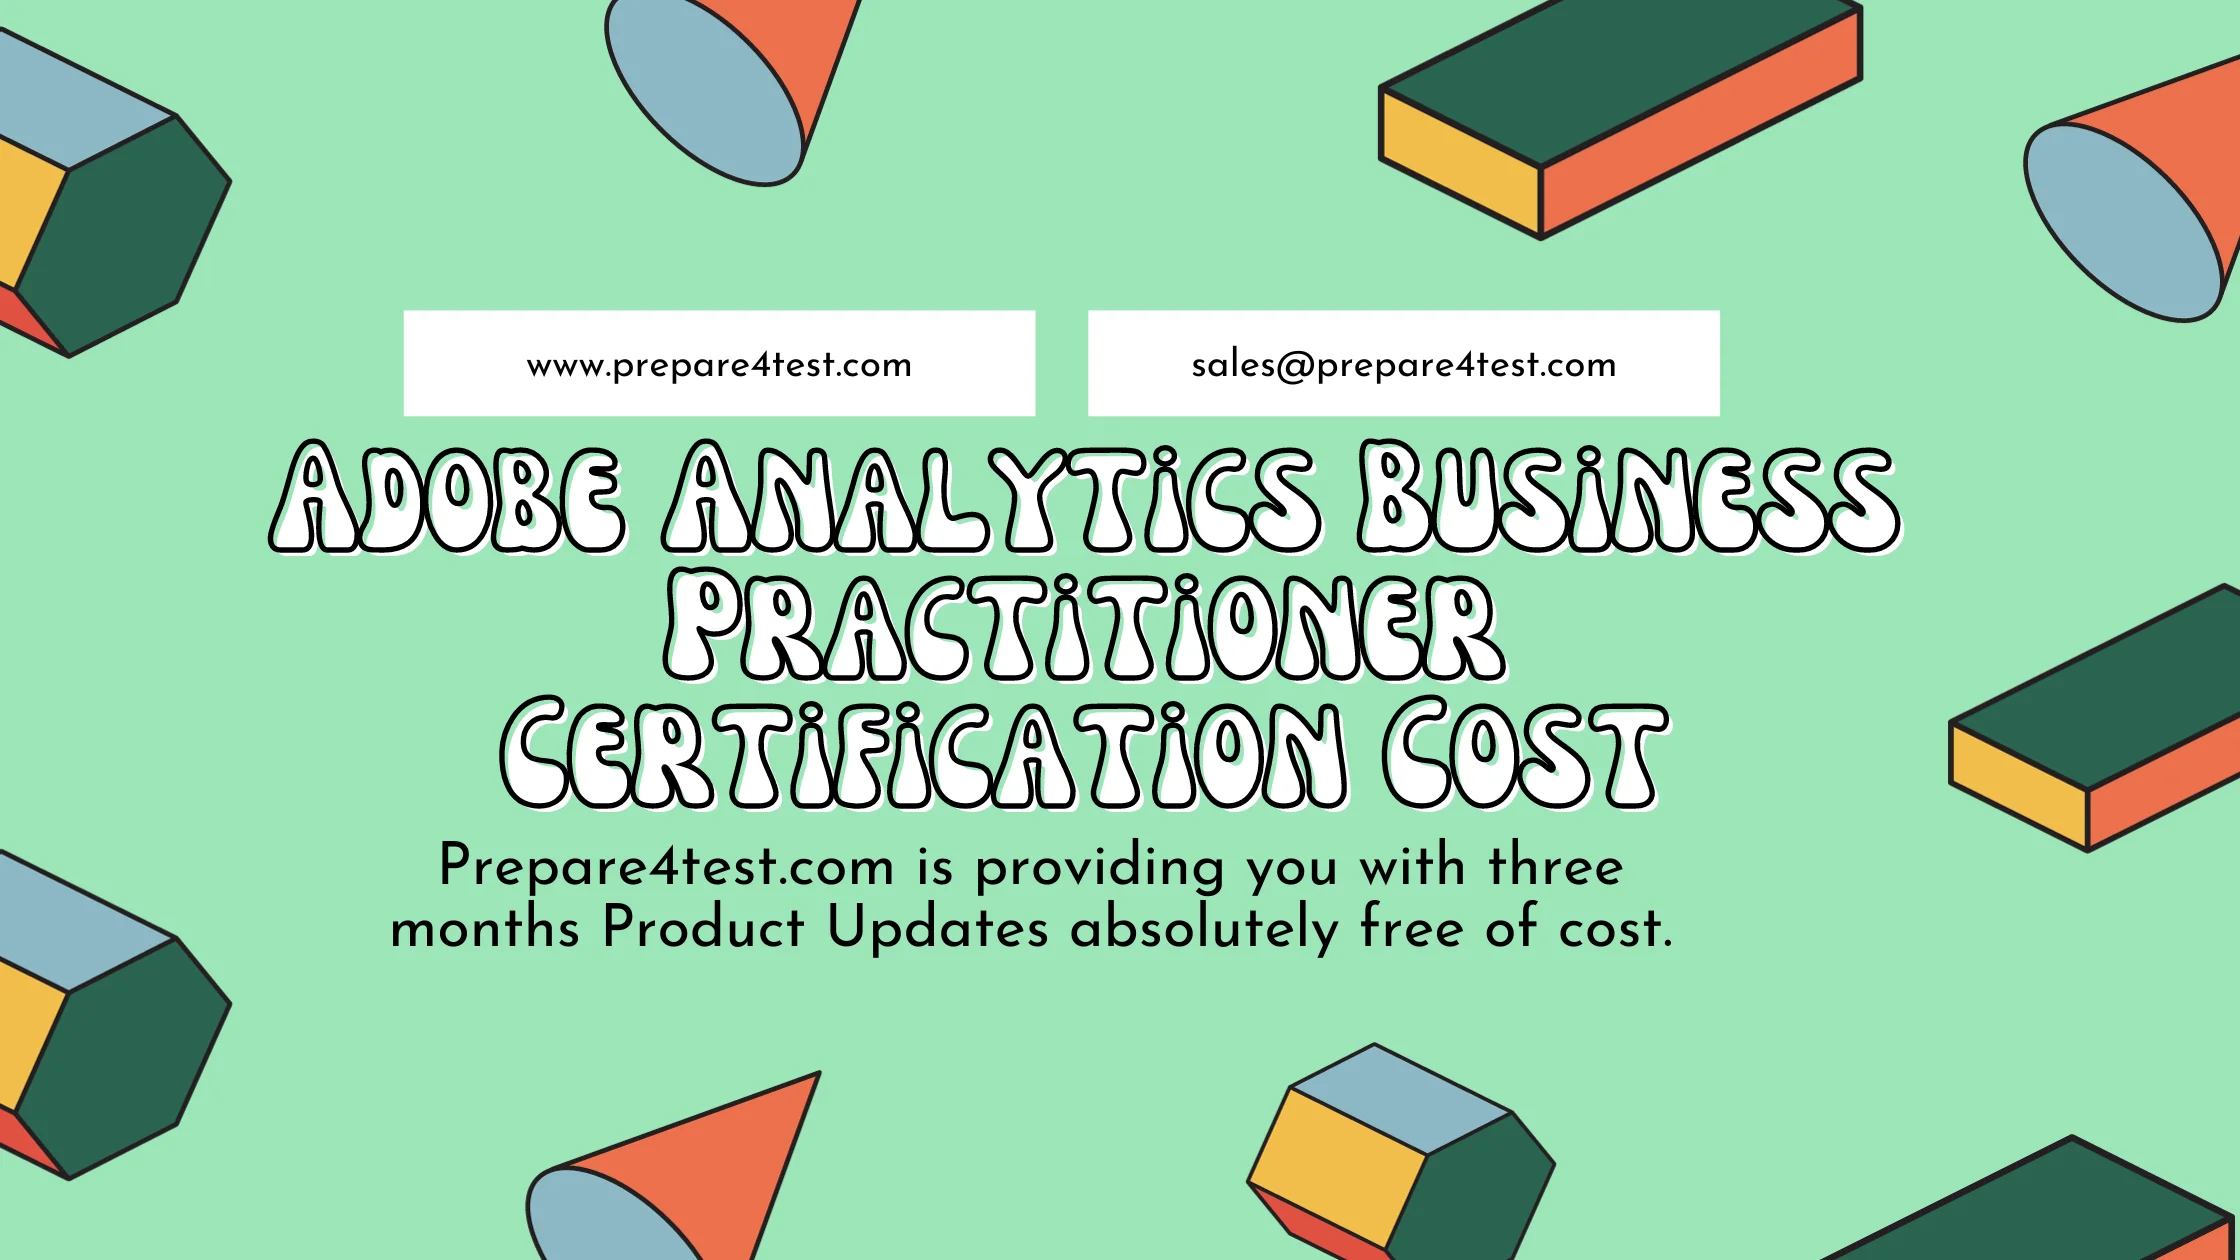 Adobe Analytics Business Practitioner Certification Cost